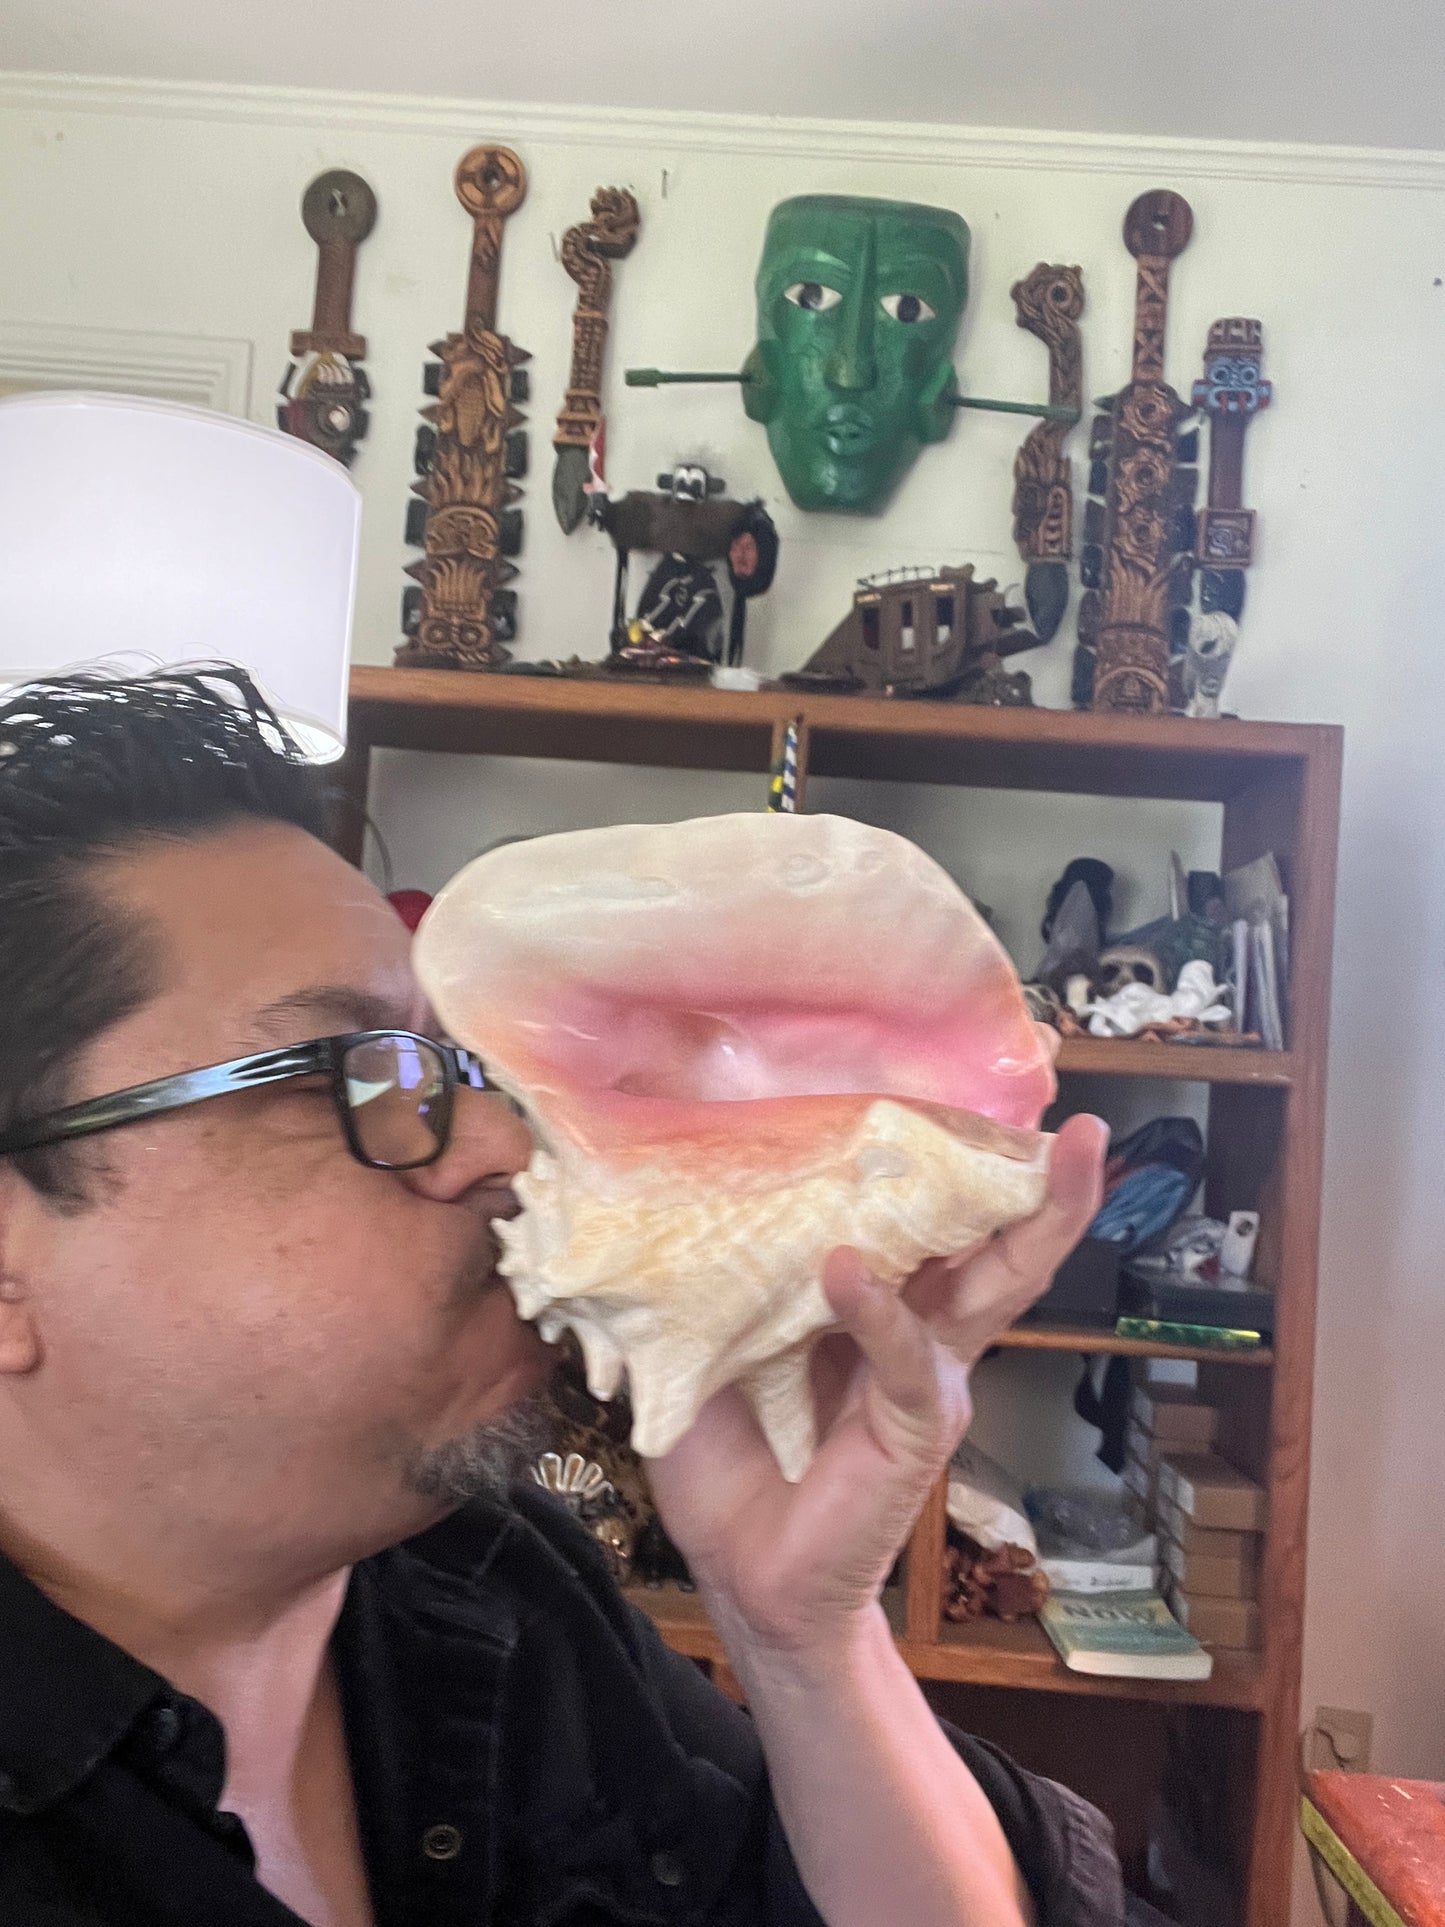 Aztec Conch Shell Trumpet, Mayan Conch Trumpet, Mexico, Mexican, Ancient, Instruments, tooled and tested, 8in.